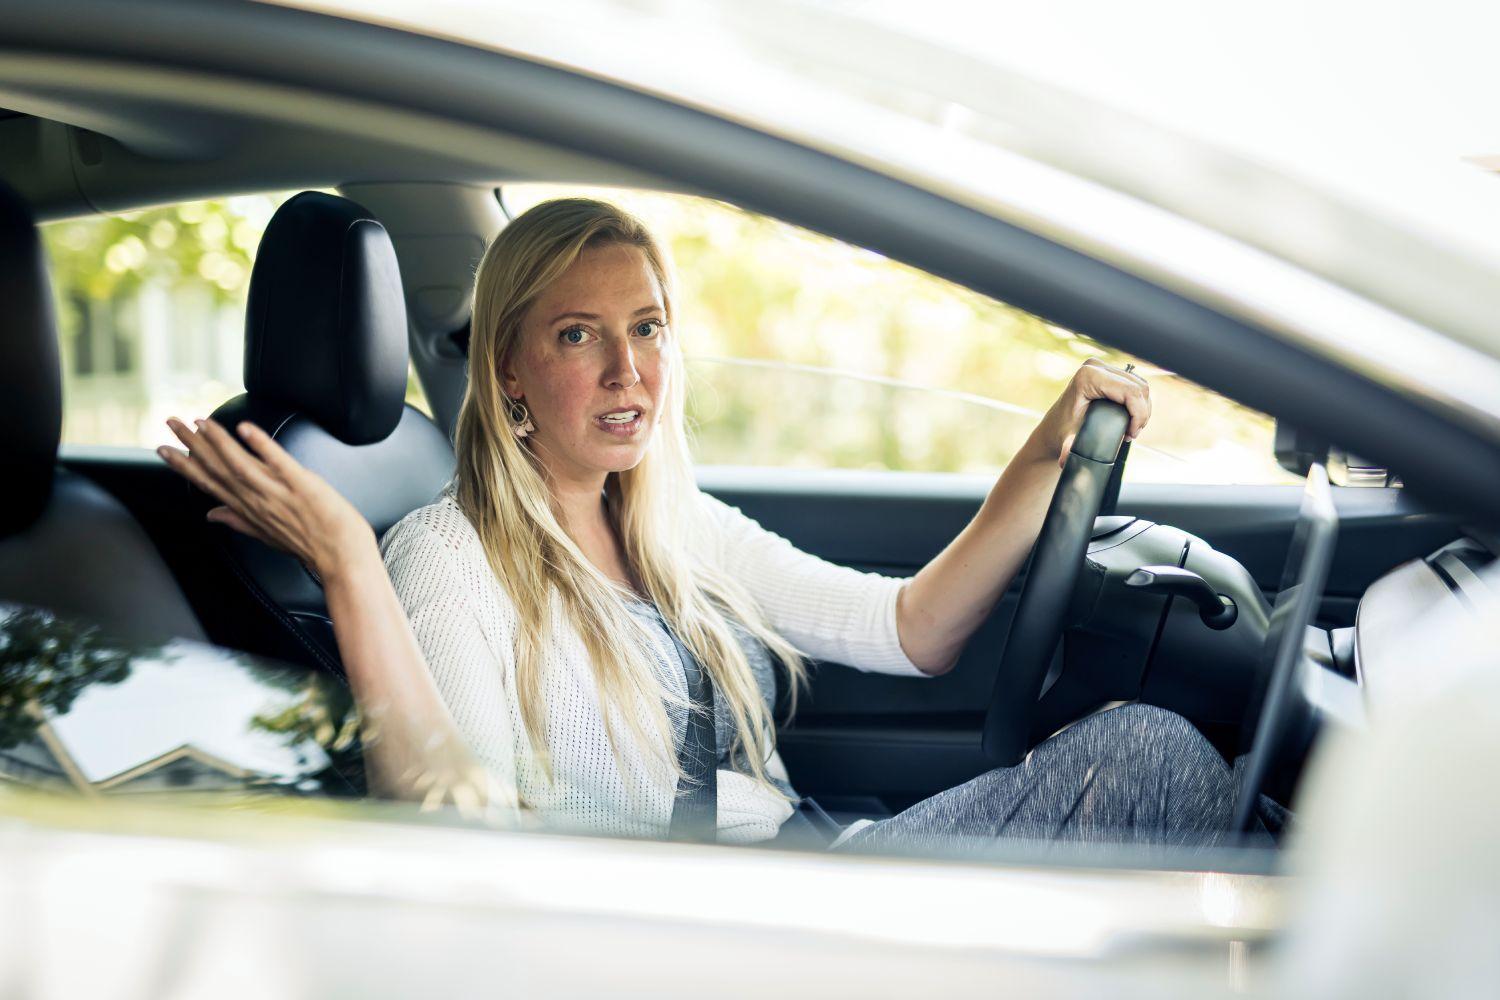 A woman looking frustrated while behind the wheel of her car.